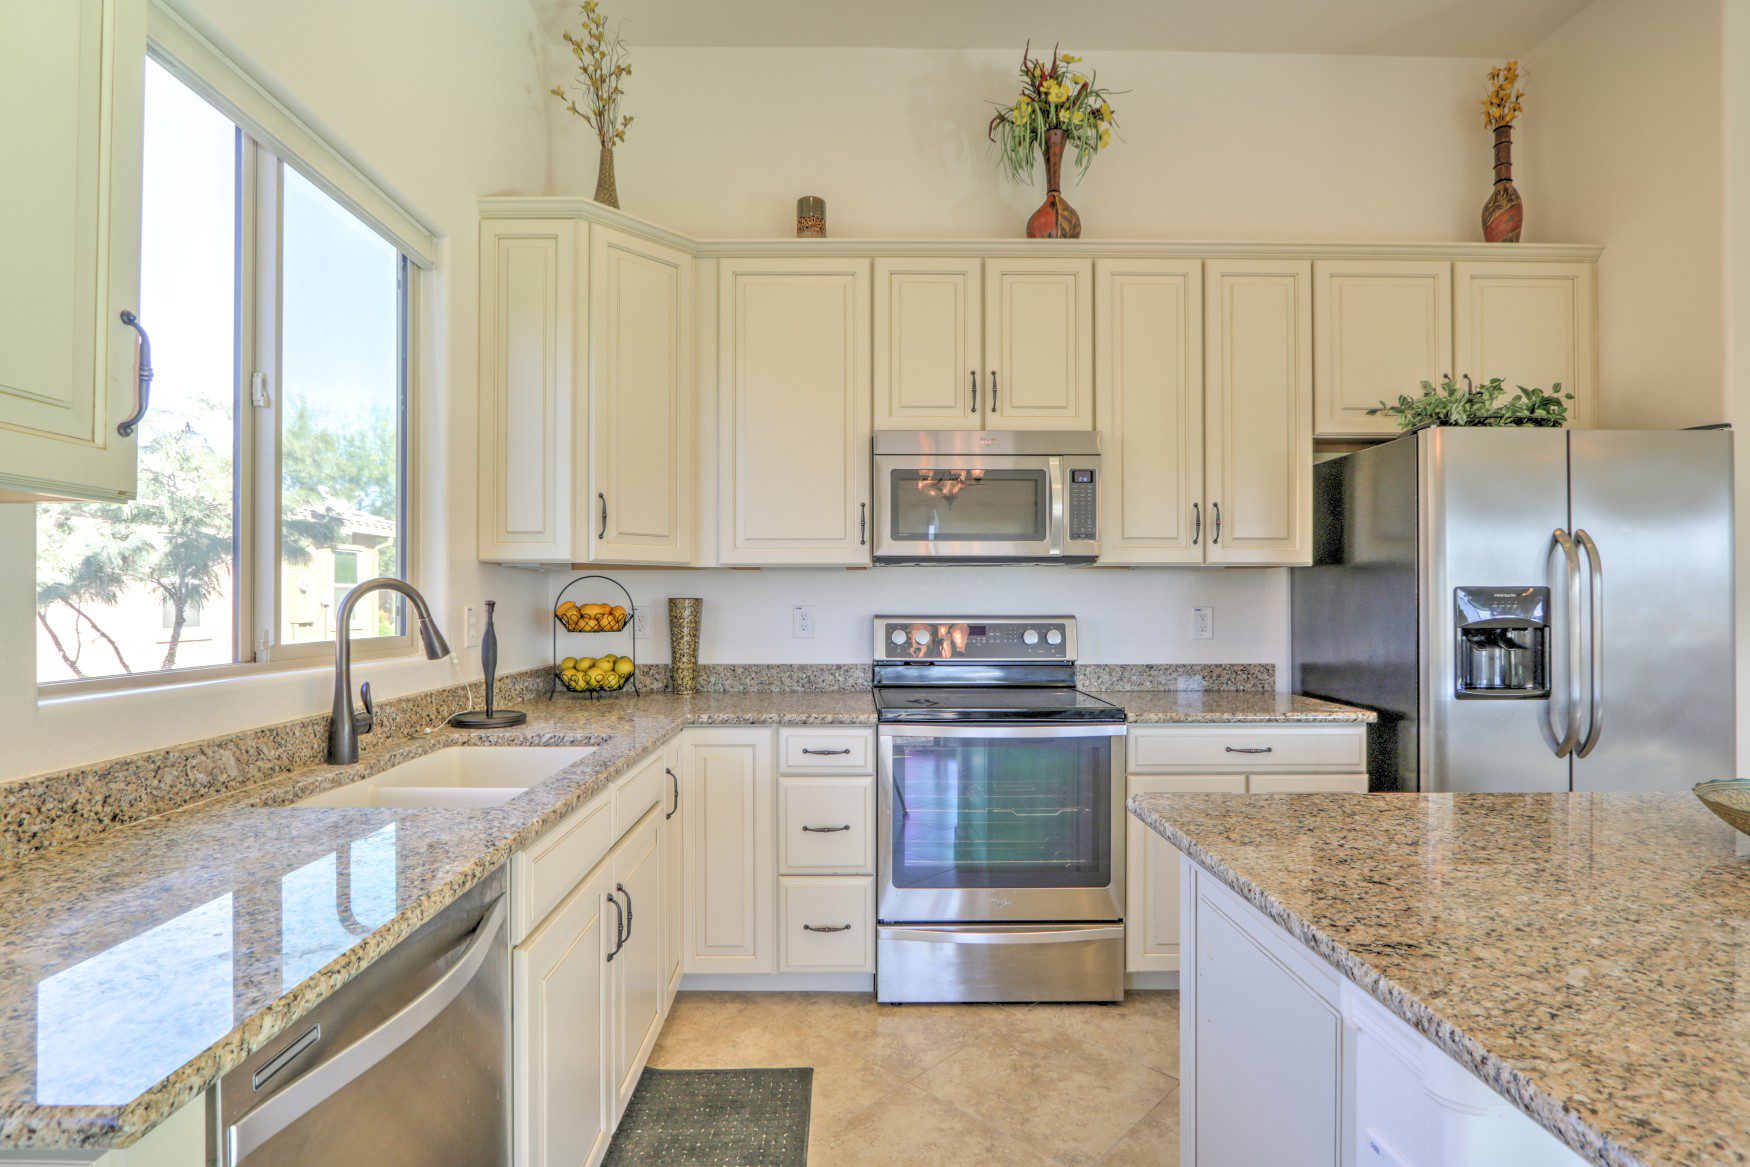 upgraded kitchen, granite counter-tops, white cabinets, stainless steel appliances